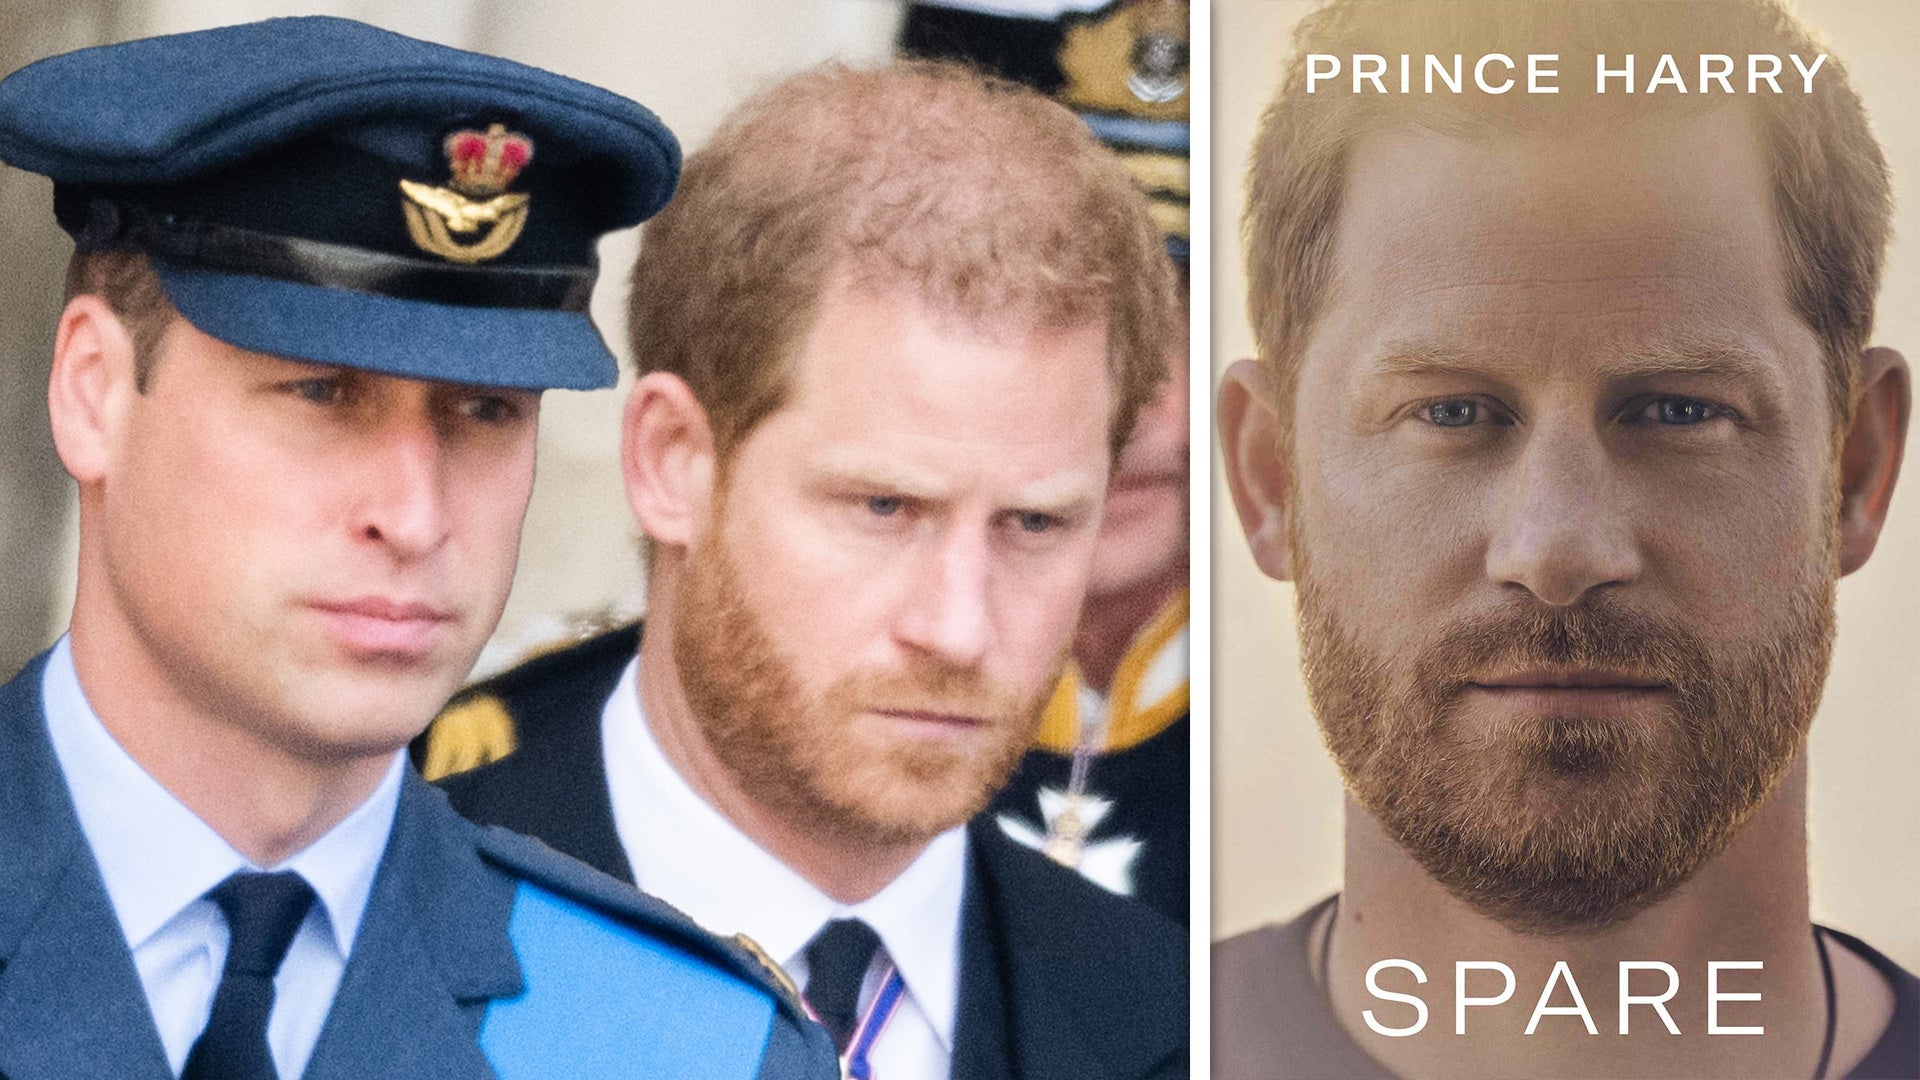 Prince Harry Claims Prince William Physically Attacked Him in Upcoming Memoir, Report Says